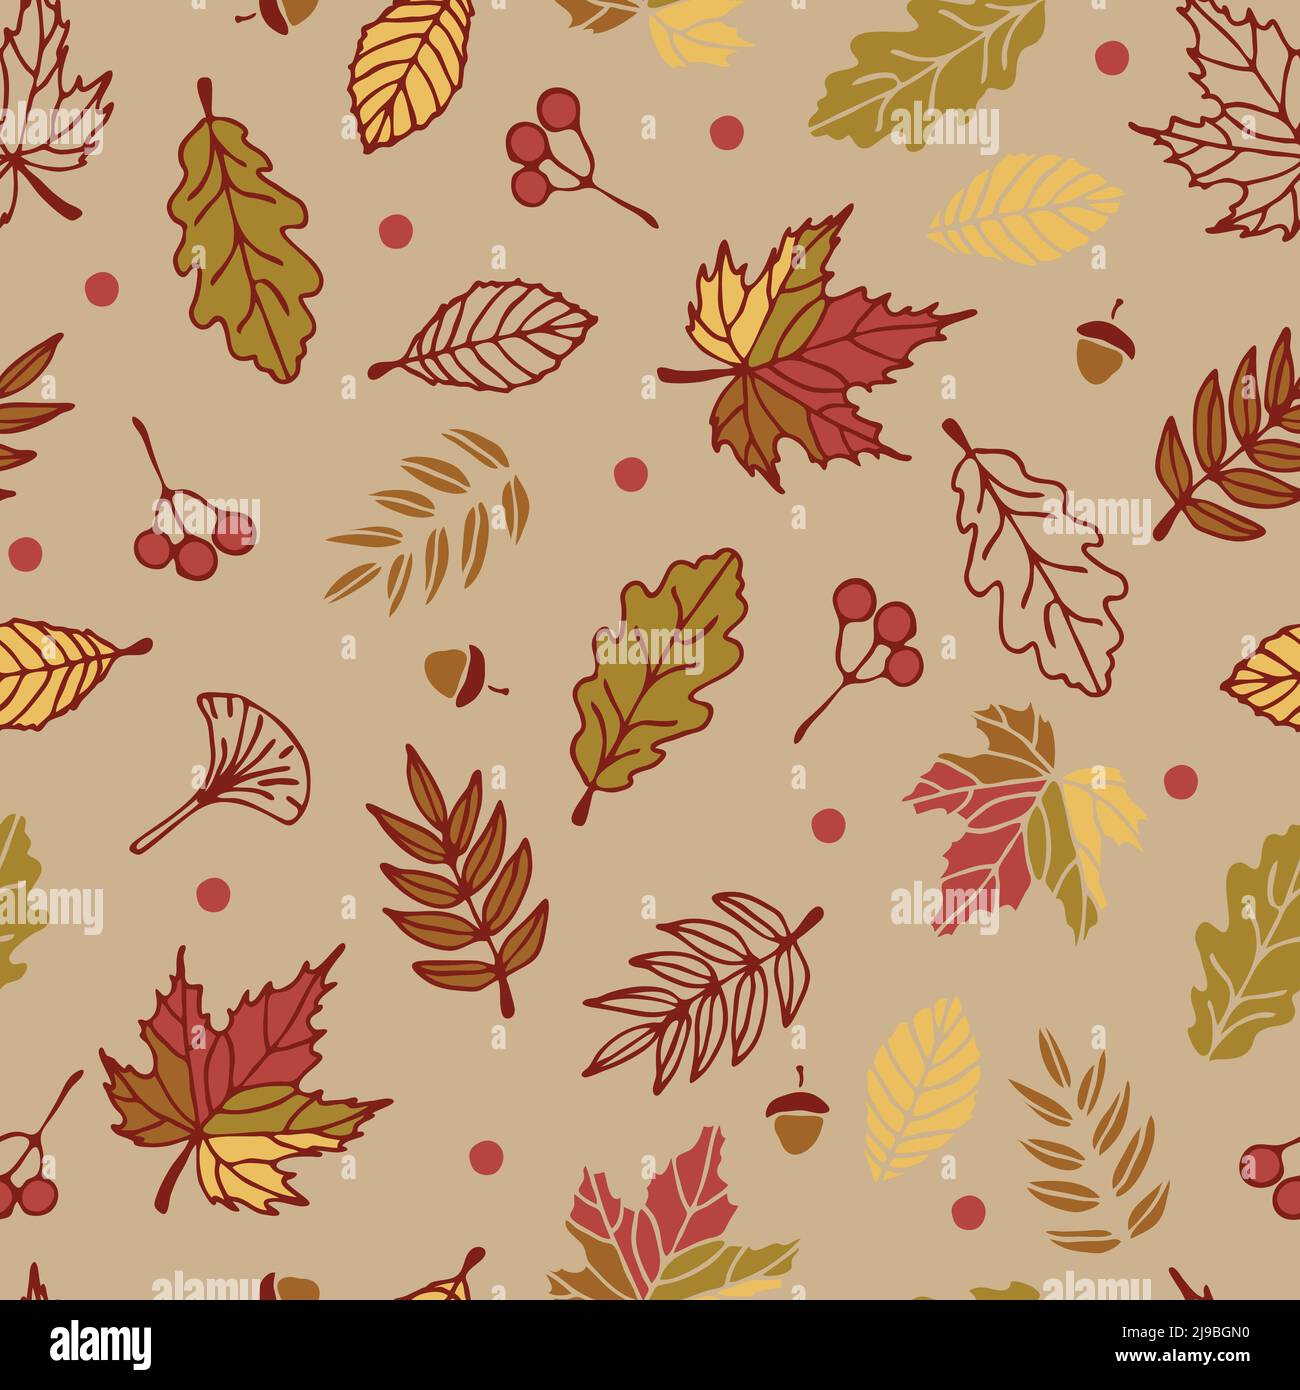 Seamless vector pattern with autumn leaves on light green background. Simple seasonal forest wallpaper design. Decorative floral fashion textile. Stock Vector